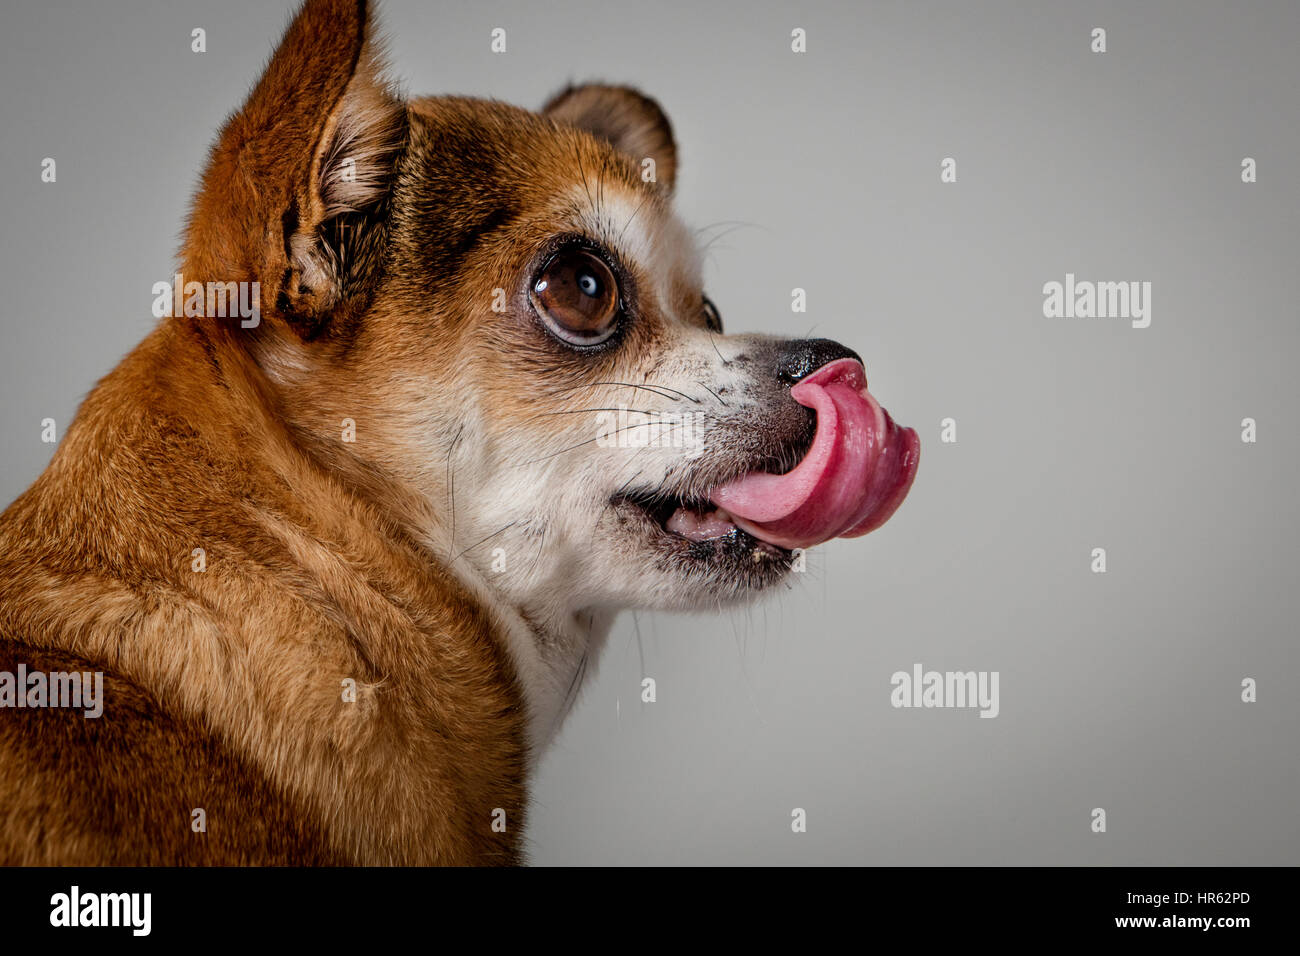 Studio portrait of a chihuahua looking upward while licking its chops. Stock Photo